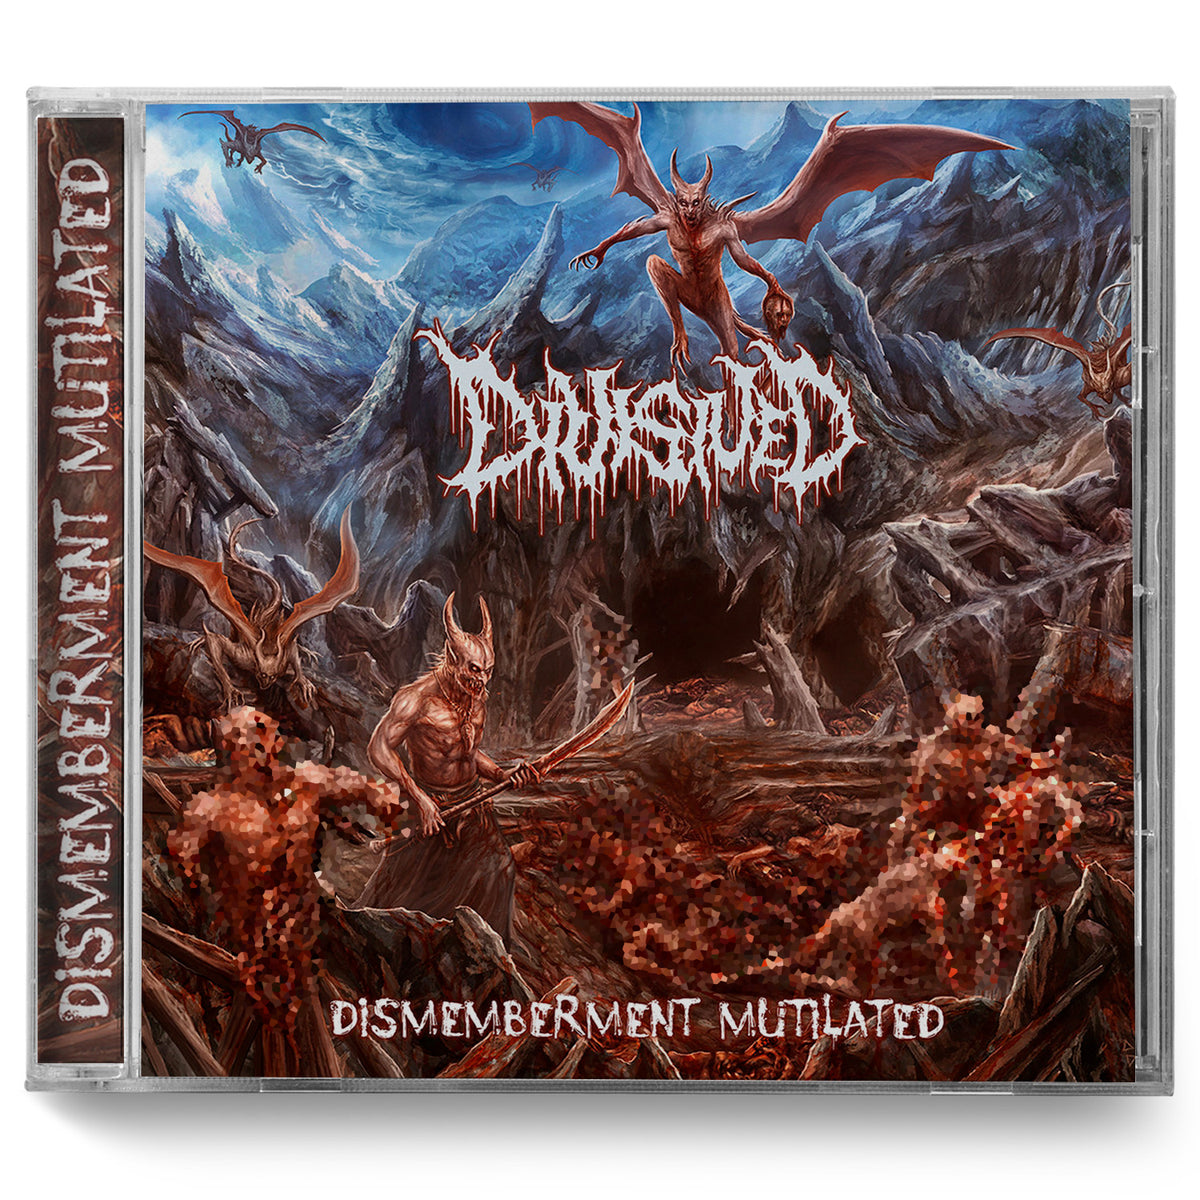 Divisived "Dismemberment Mutilated" CD - Miasma Records